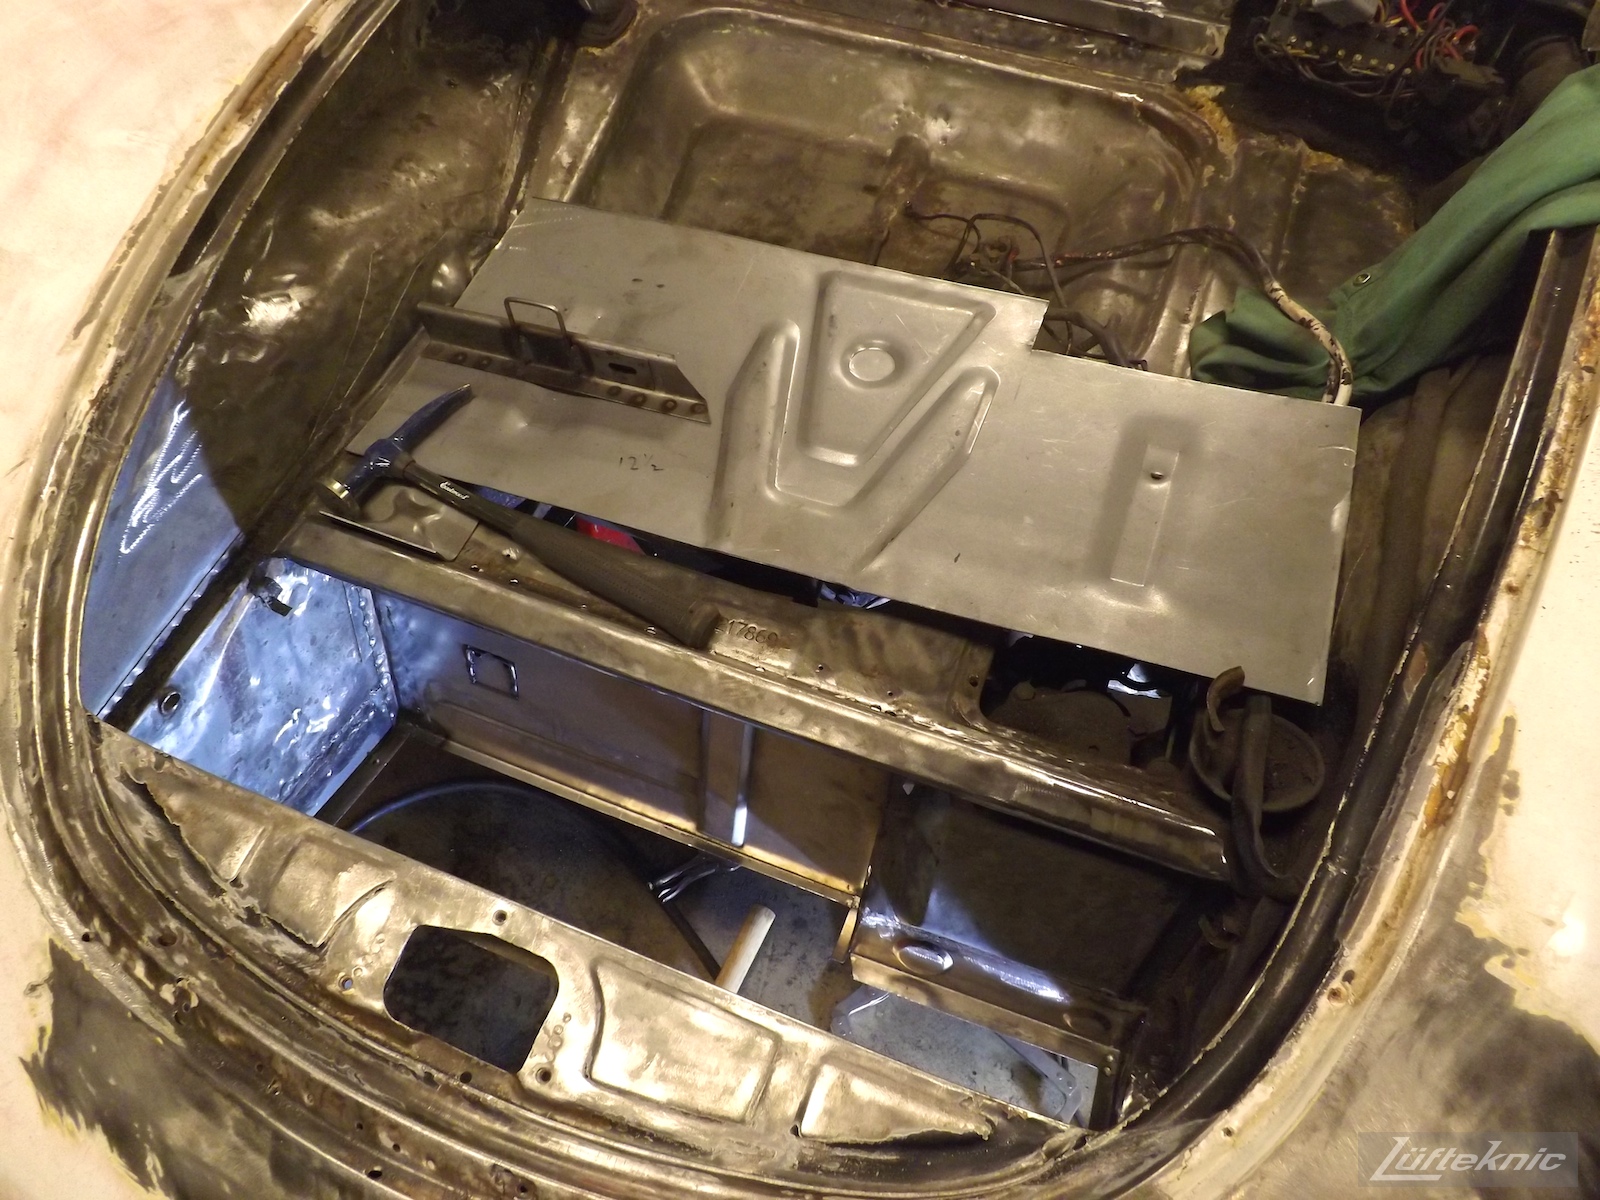 New trunk metal for a White 1964 Porsche 356SC being restored.